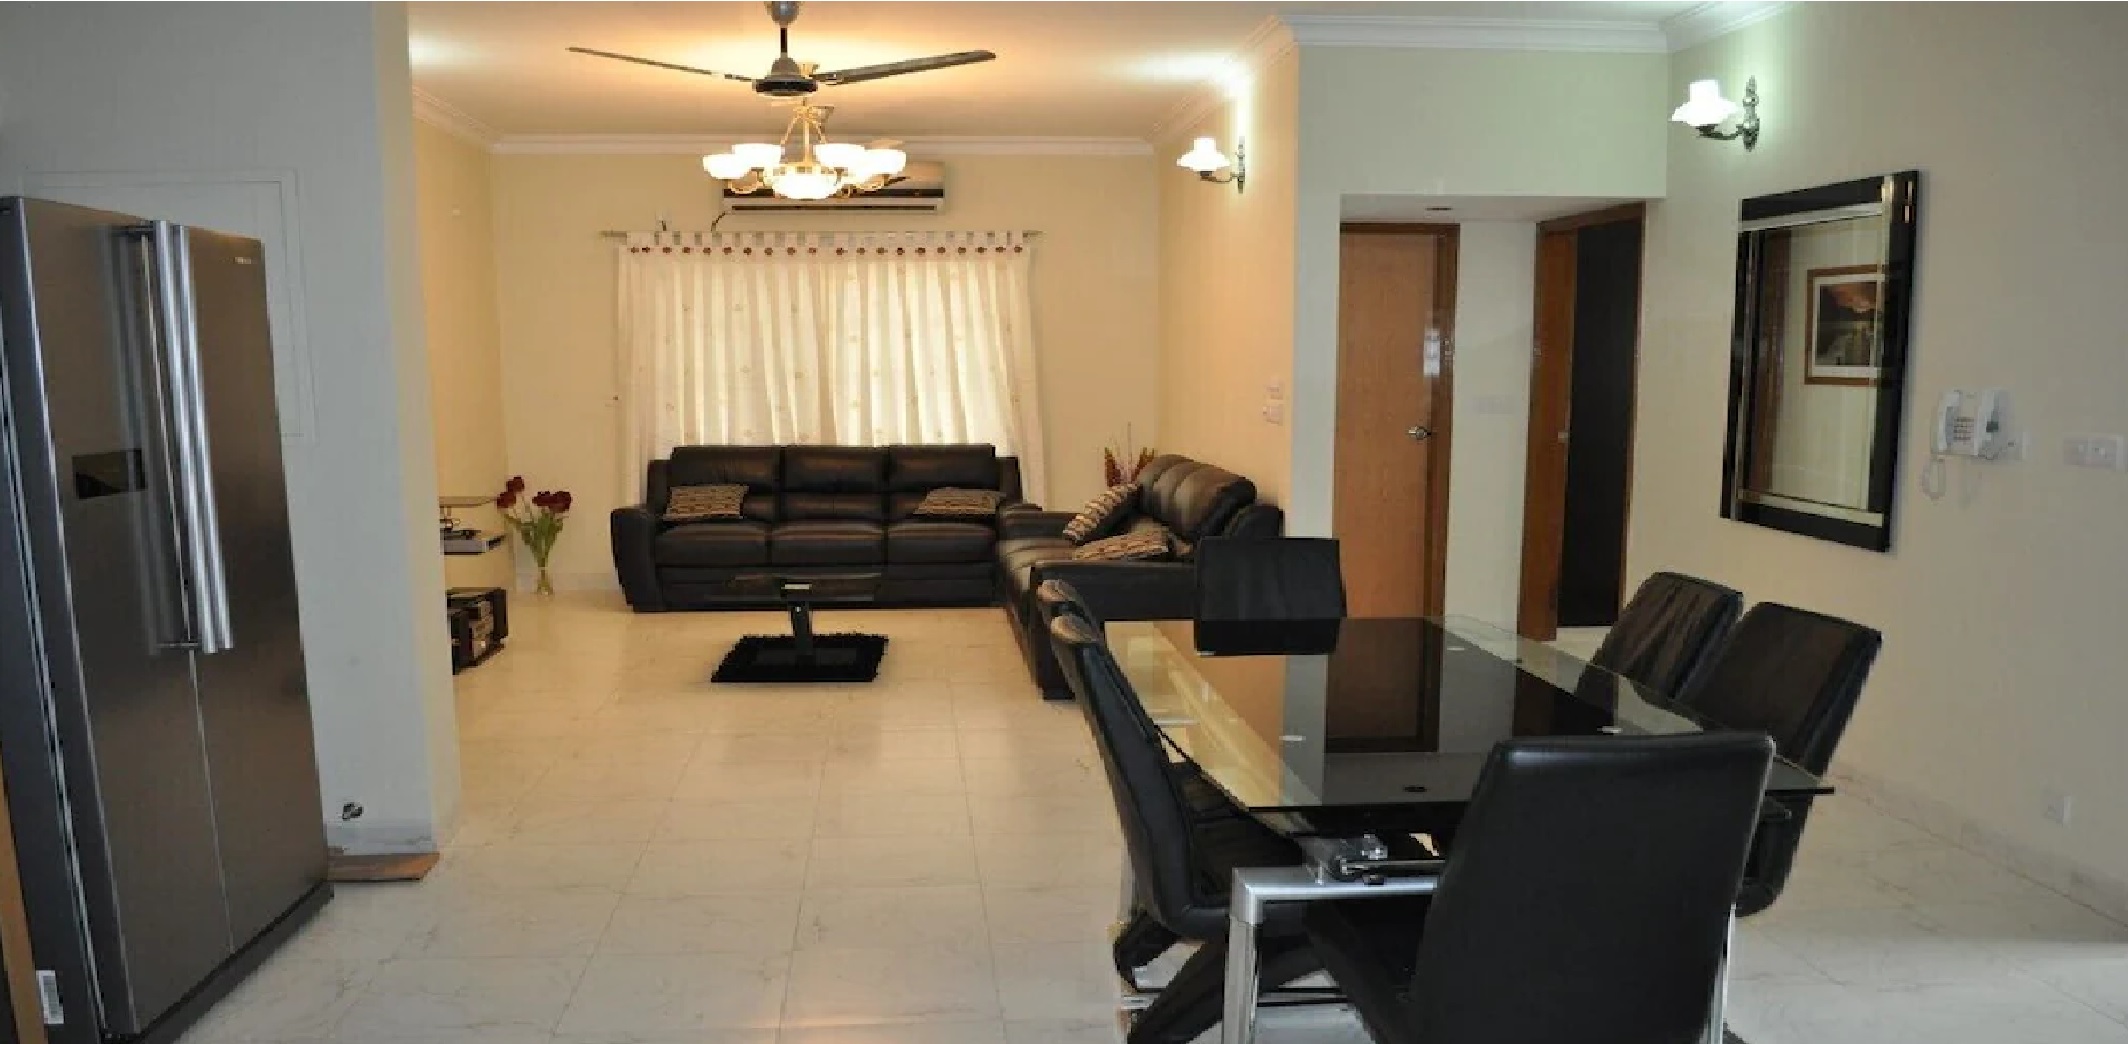 Apartment (On Going) in Dhaka interior view